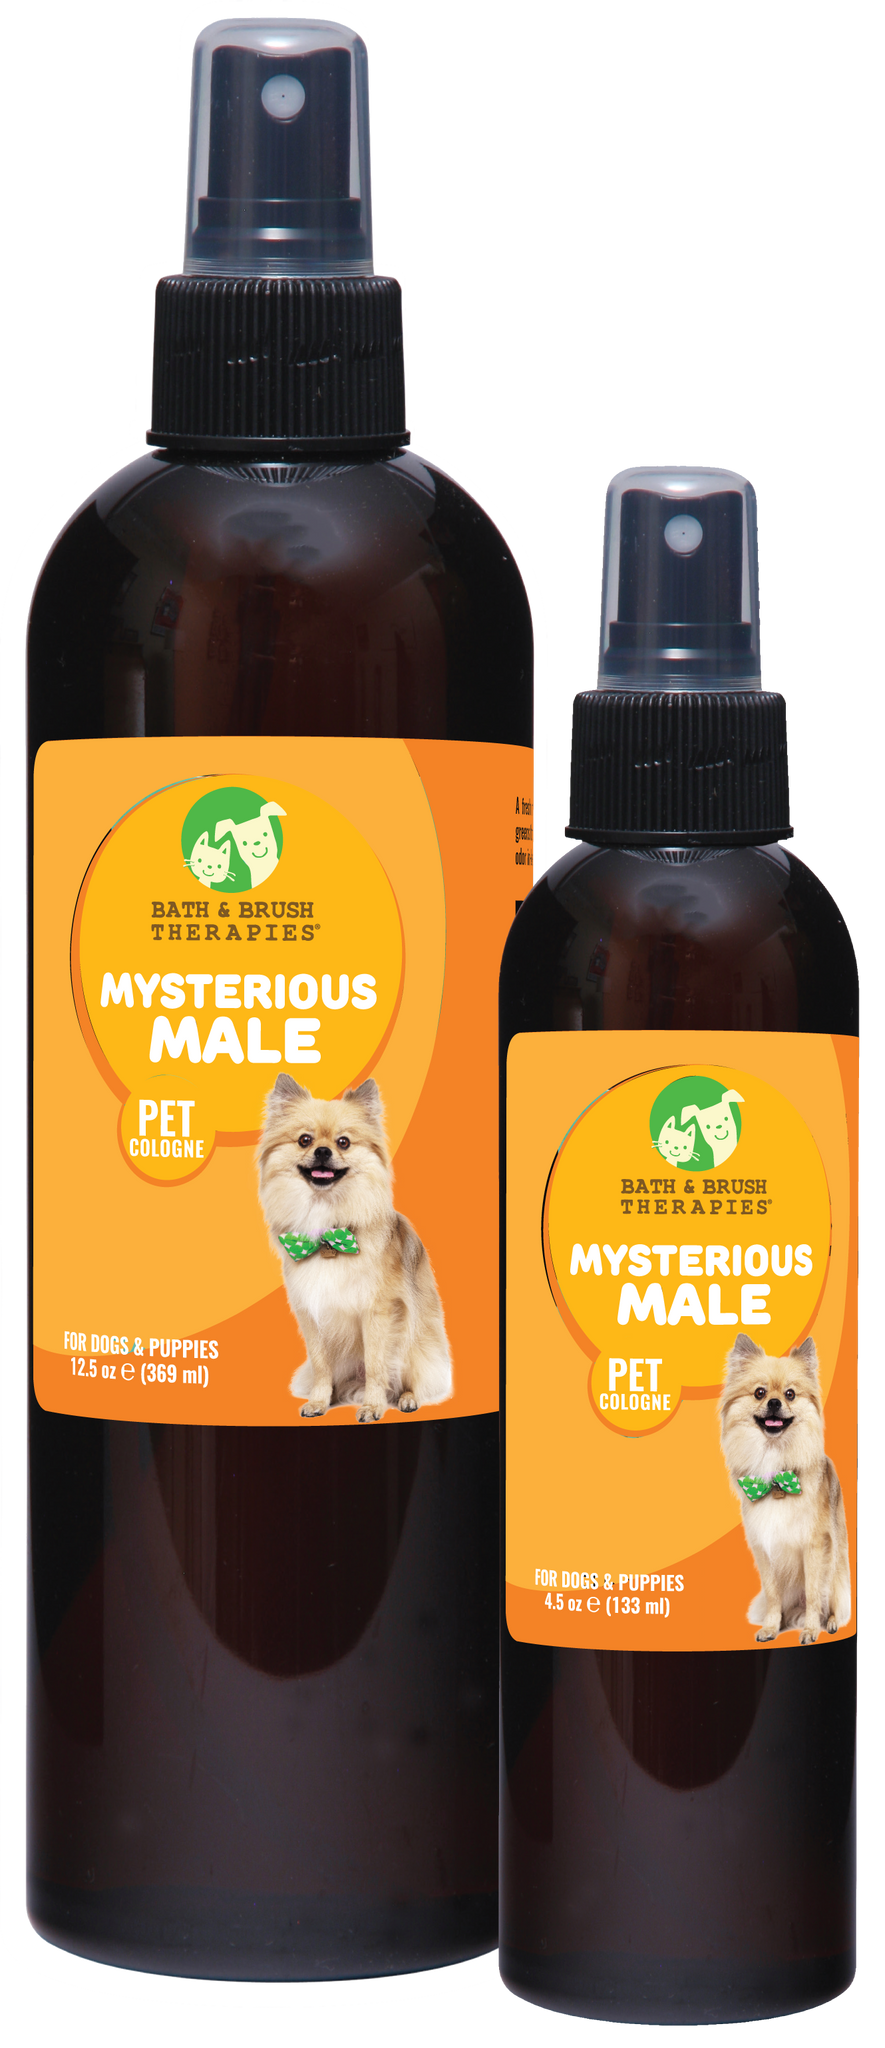 Mysterious Male Pet® Cologne | Bath & Brush Therapies®